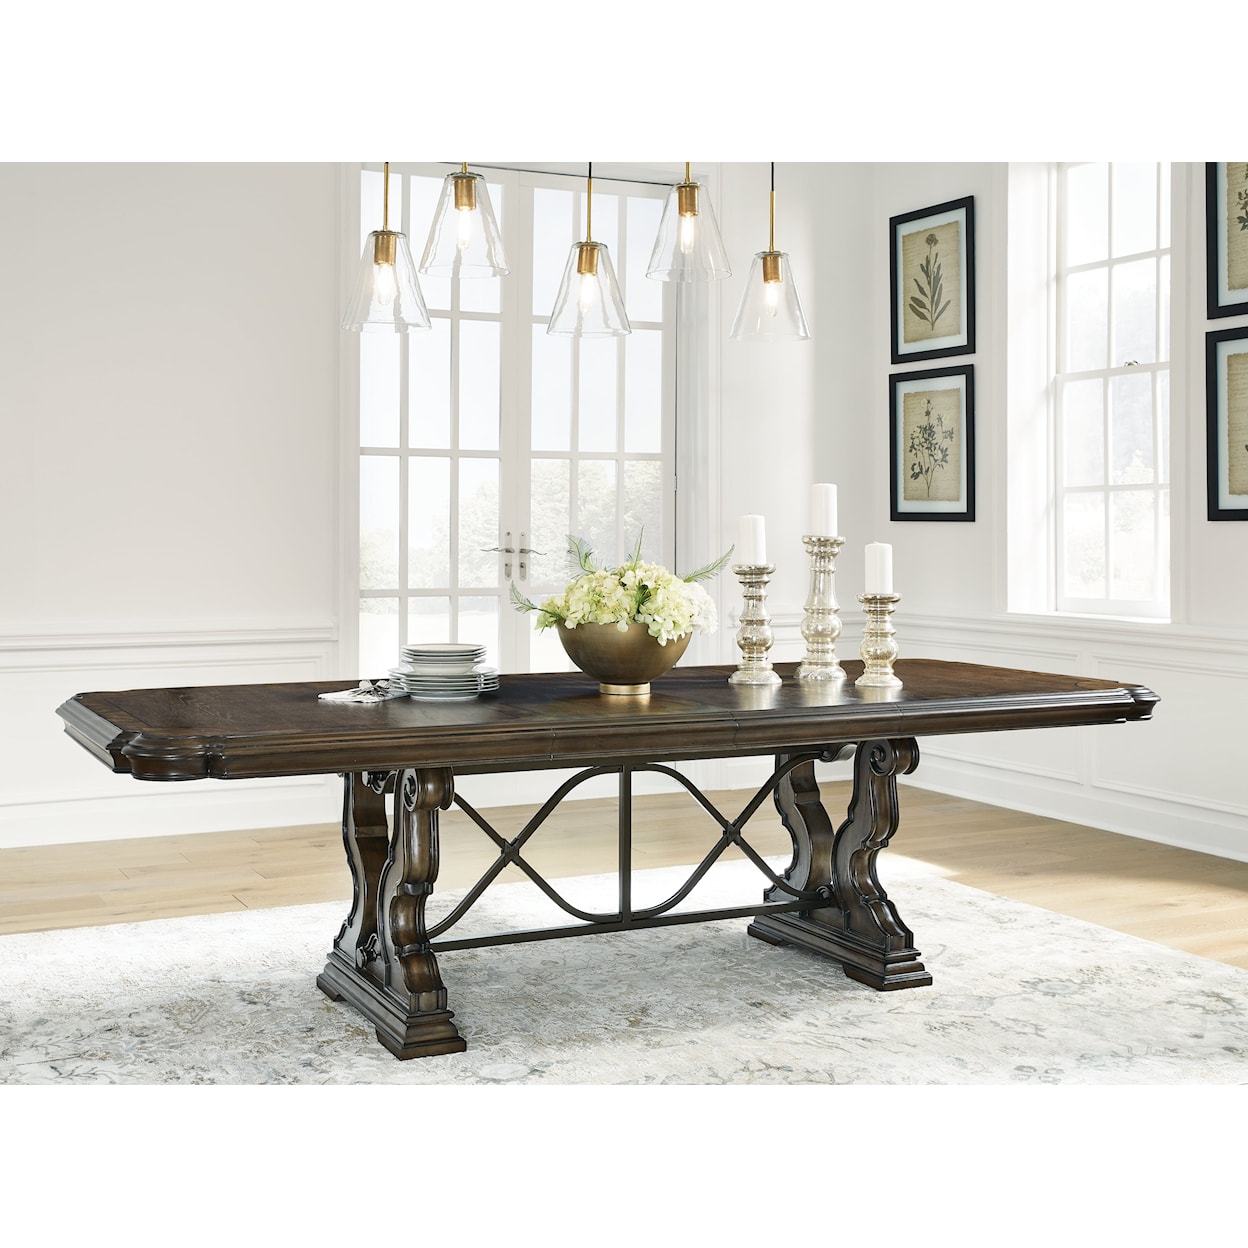 Belfort Select Fillmore Dining Extension Table